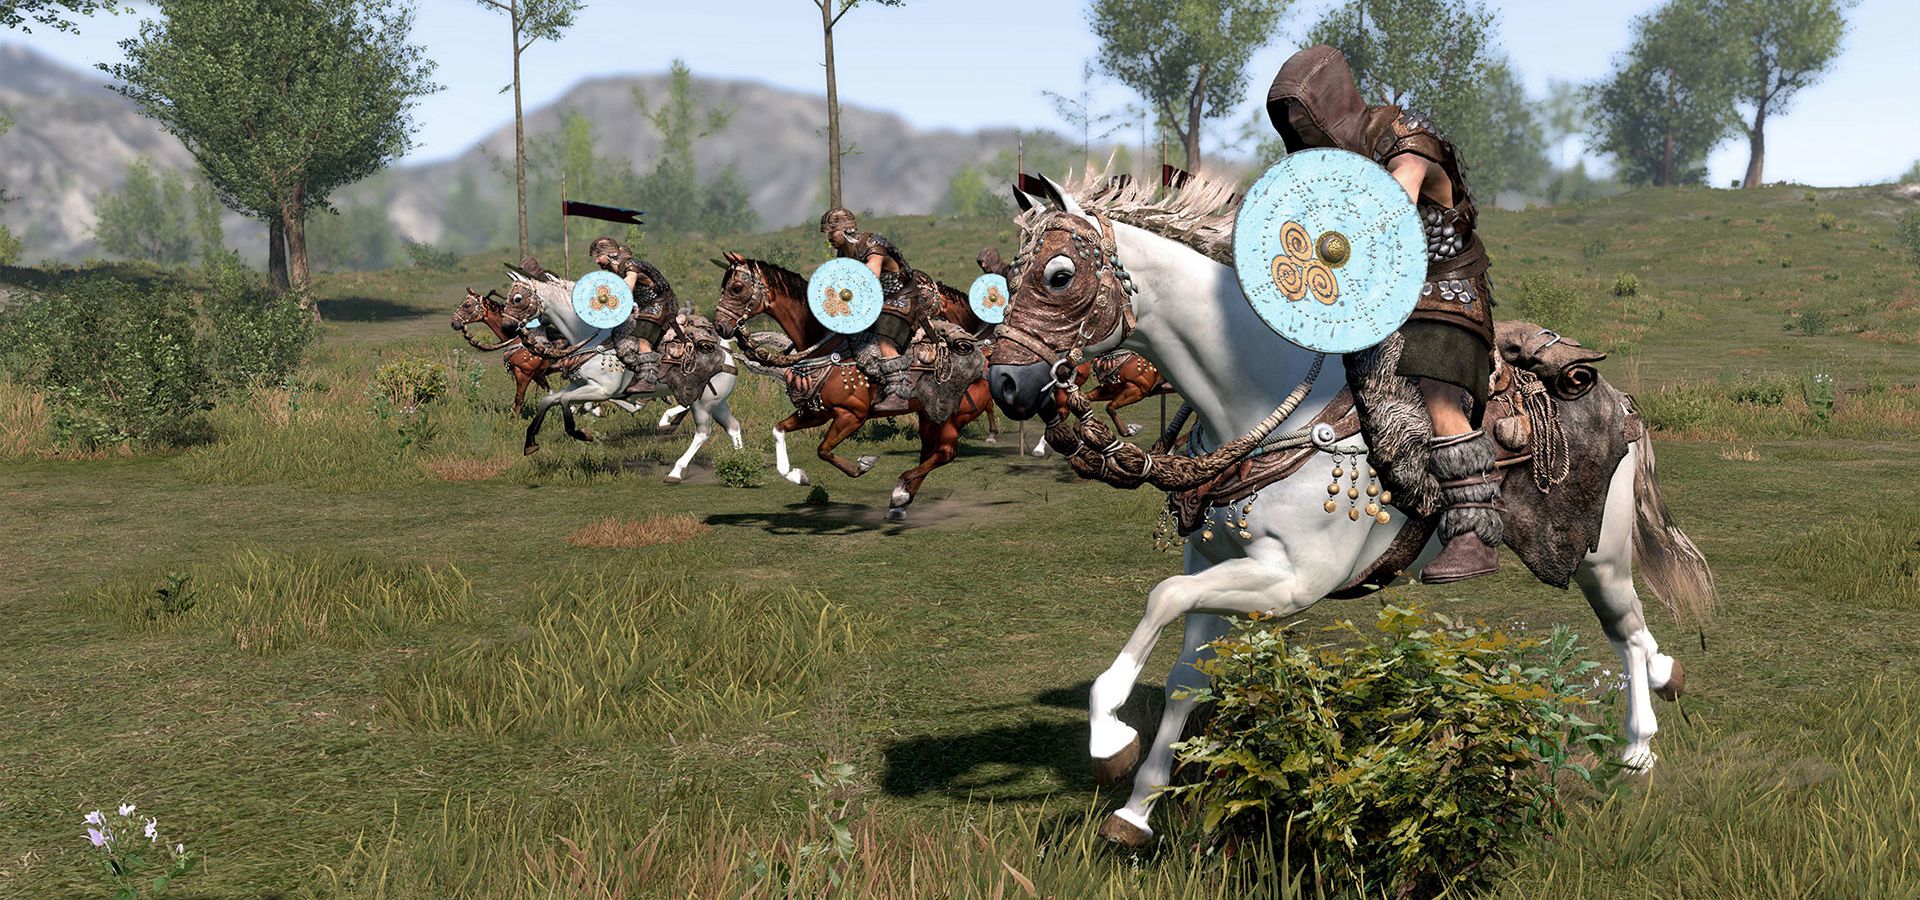 In this article, we are going to be covering the Mount and Blade 2 Bannerlord Sandbox mode, what it is, how it works, and everything else that you need to know about it.